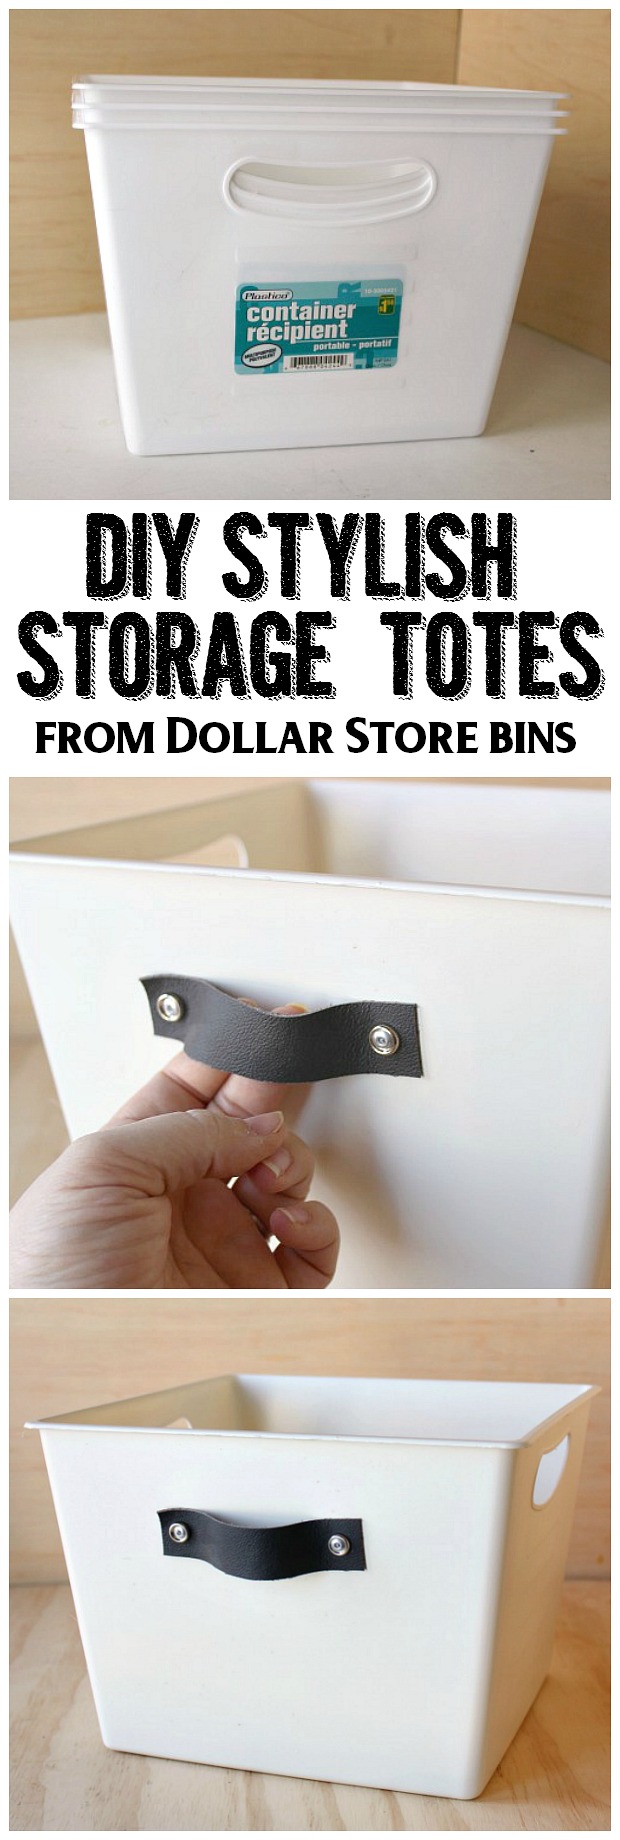 Dress up those boring dollar store bins with this easy tutorial for stylish DIY storage totes. Perfect for front entry storage, toy storage, pantry storage and more!